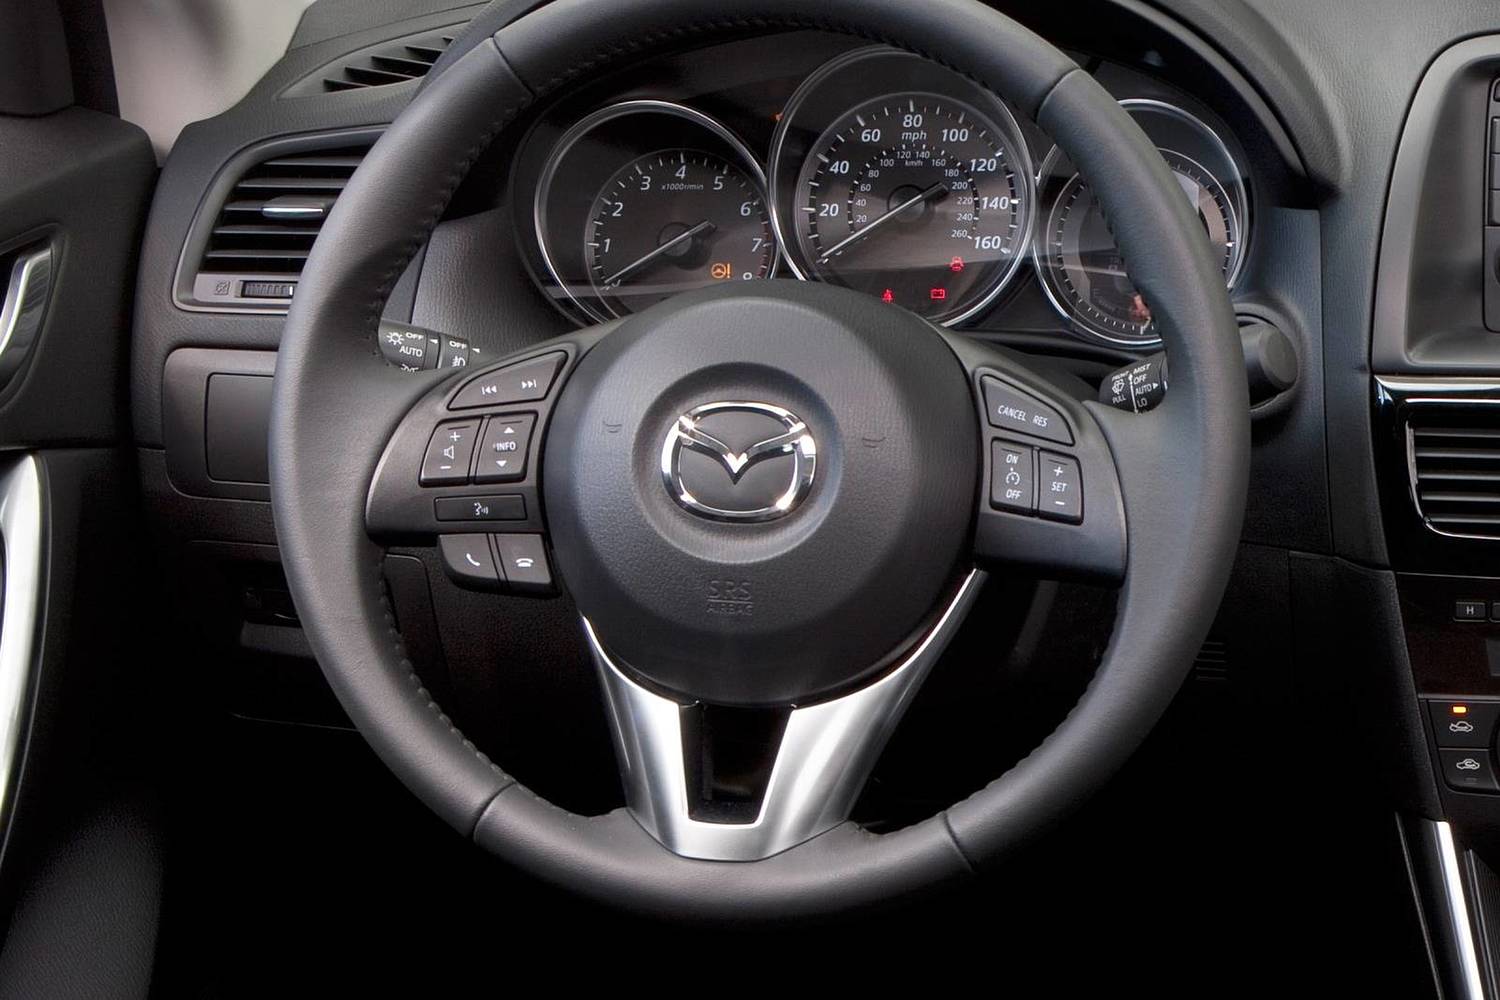 Mazda CX-5 Grand Touring 4dr SUV Steering Wheel Detail (2014 model year shown)